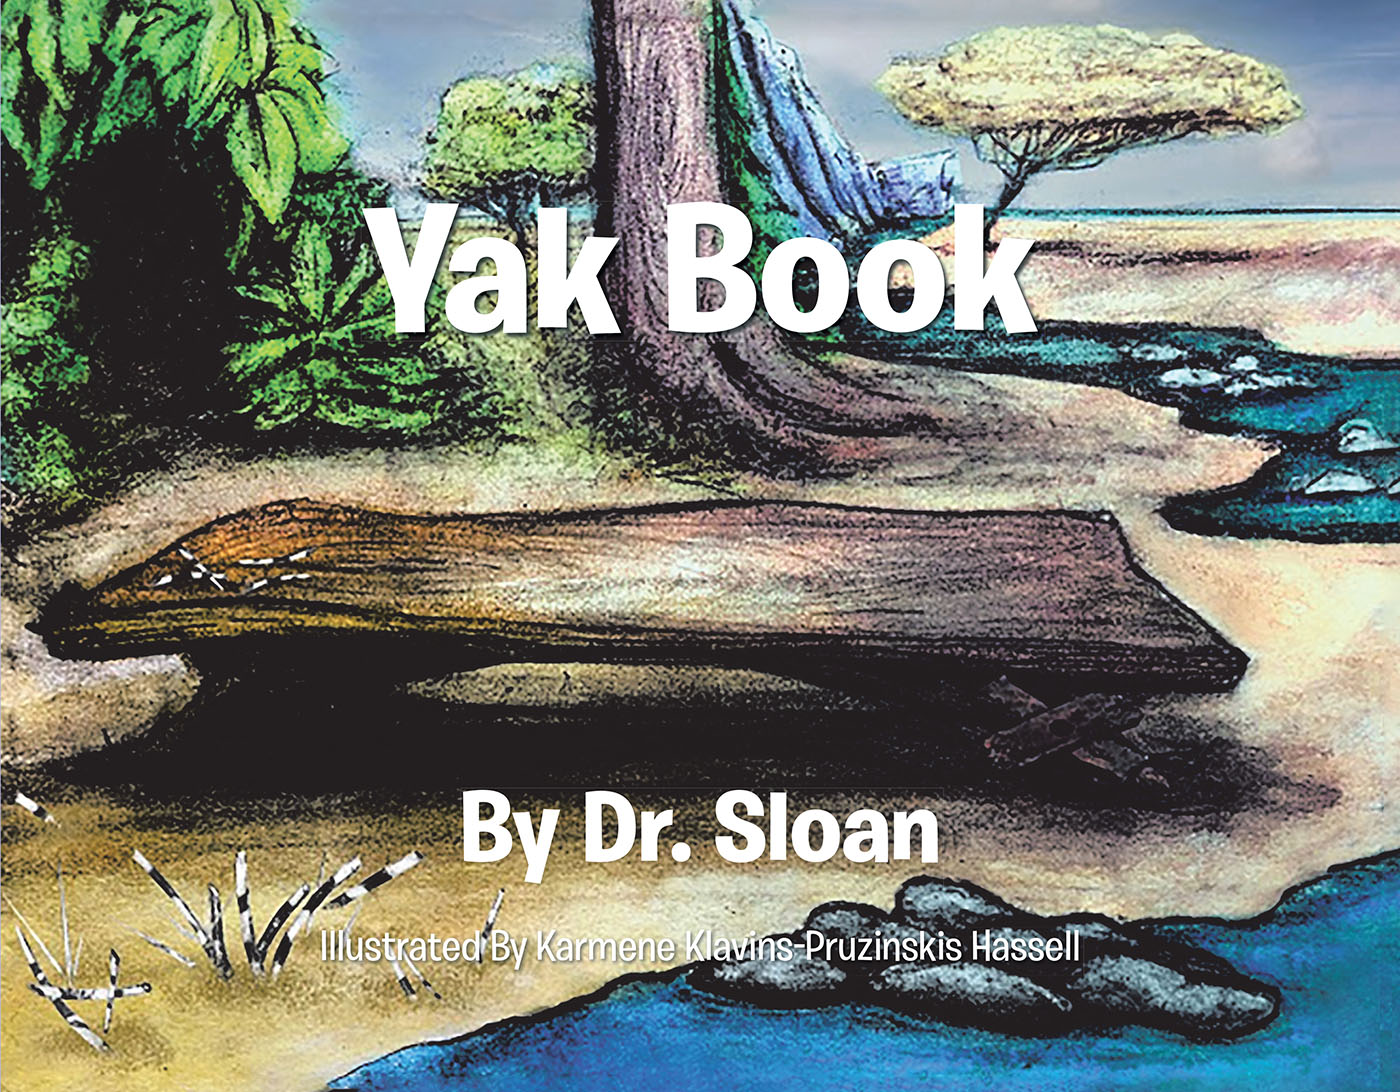 Dr. Sloan’s Newly Released "Yak Book" is a Fun Finale to the Author’s Engaging Trilogy That Explores the Alphabet Within Creation